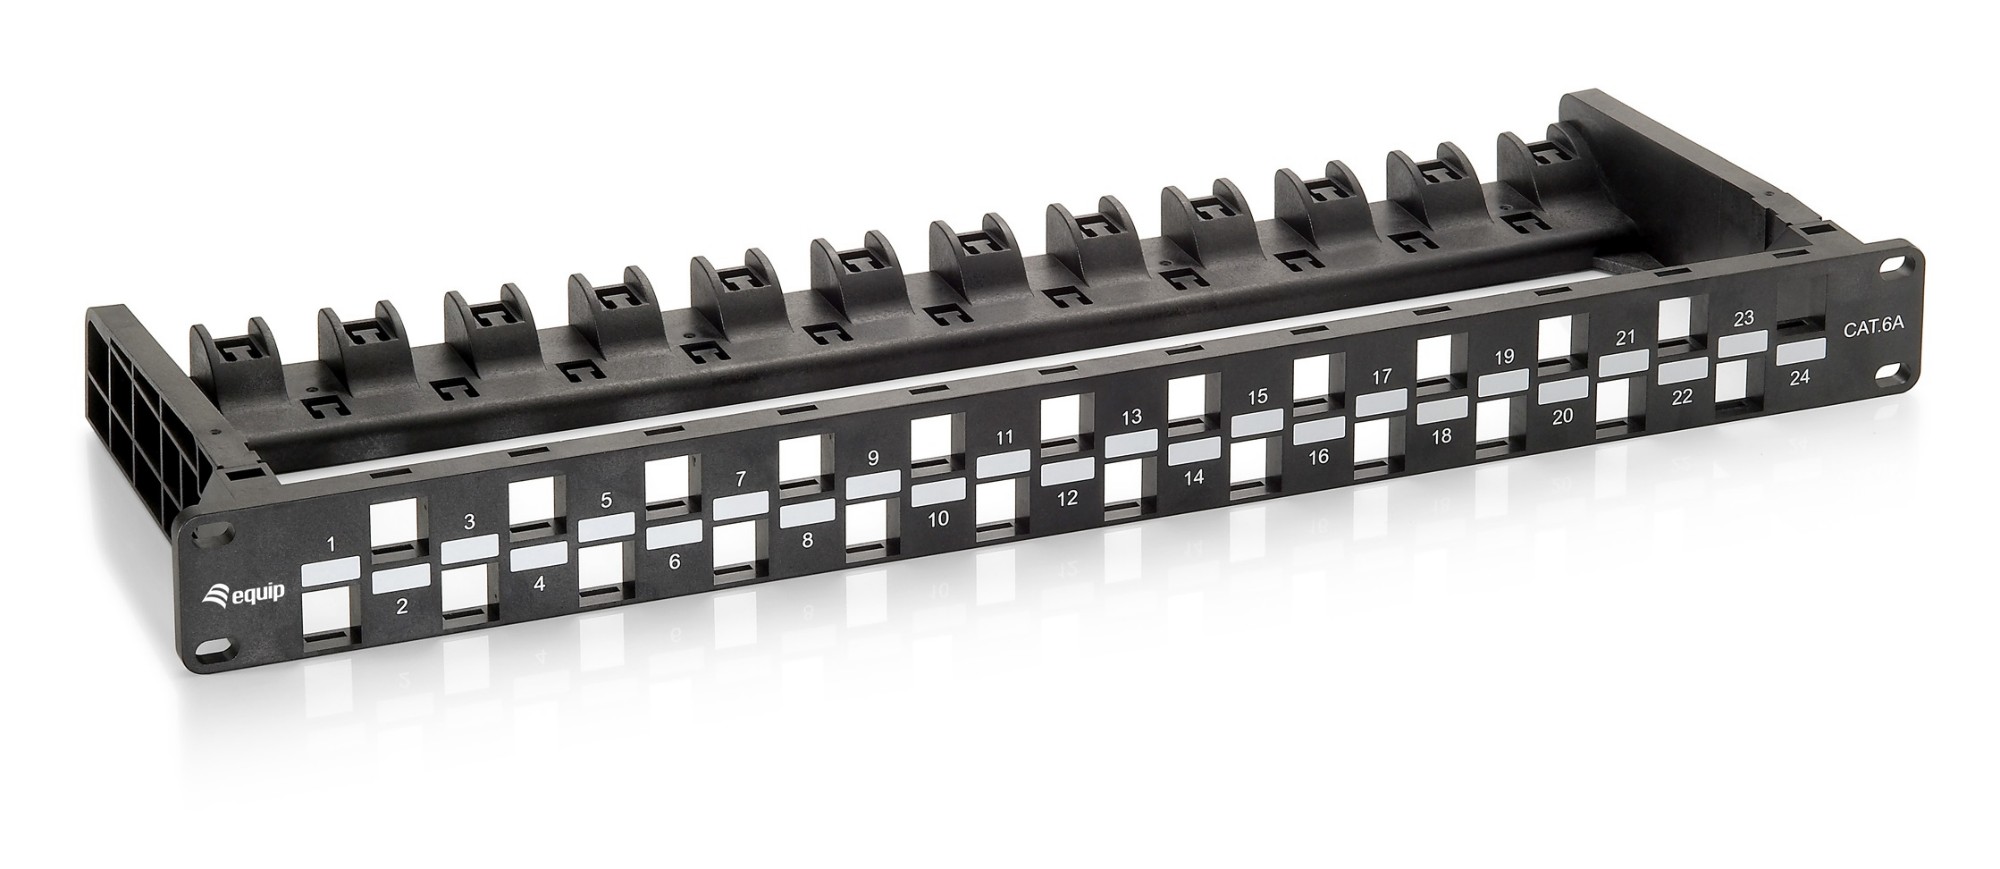 Photos - Other network equipment Equip 24-Port Keystone Cat.6A Unshielded Patch Panel, Black 769225 